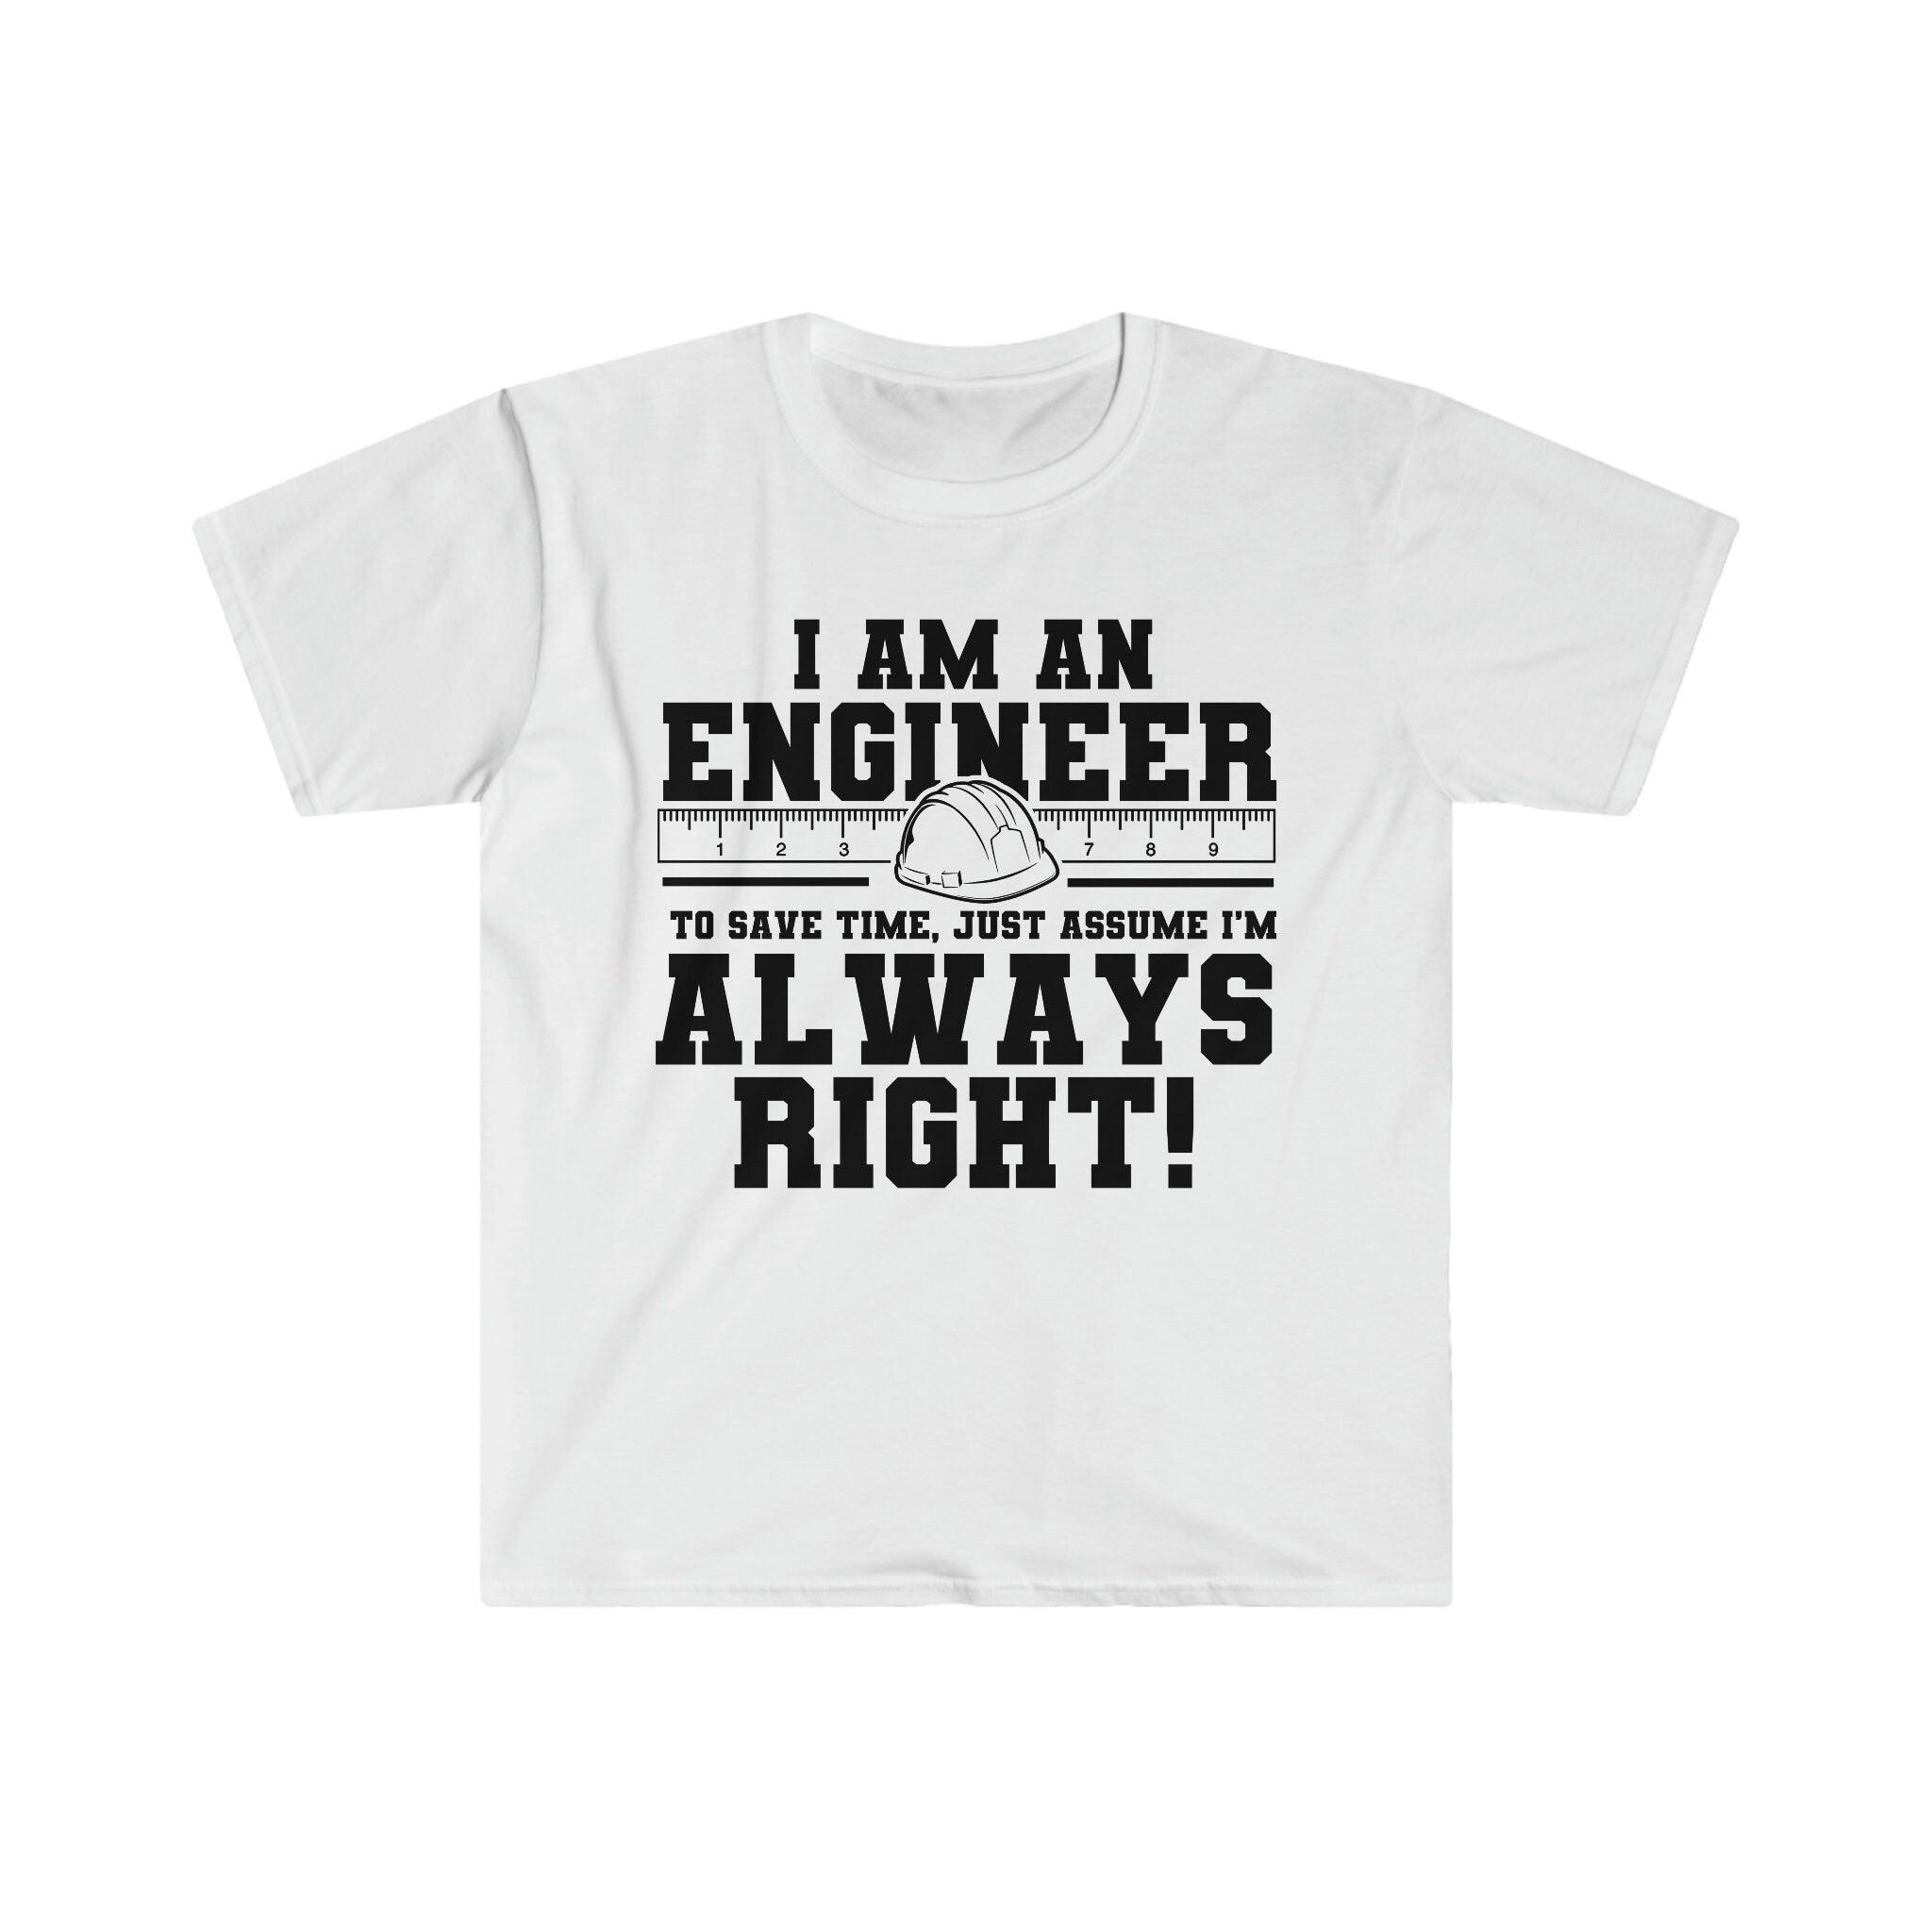 I Am An Engineer Printed Letter Summer 2022 Men's T-Shirts Short Sleeve Cotton T-Shirt, Gift for Engineers, Engineers are always right Tee, tees - plusminusco.com